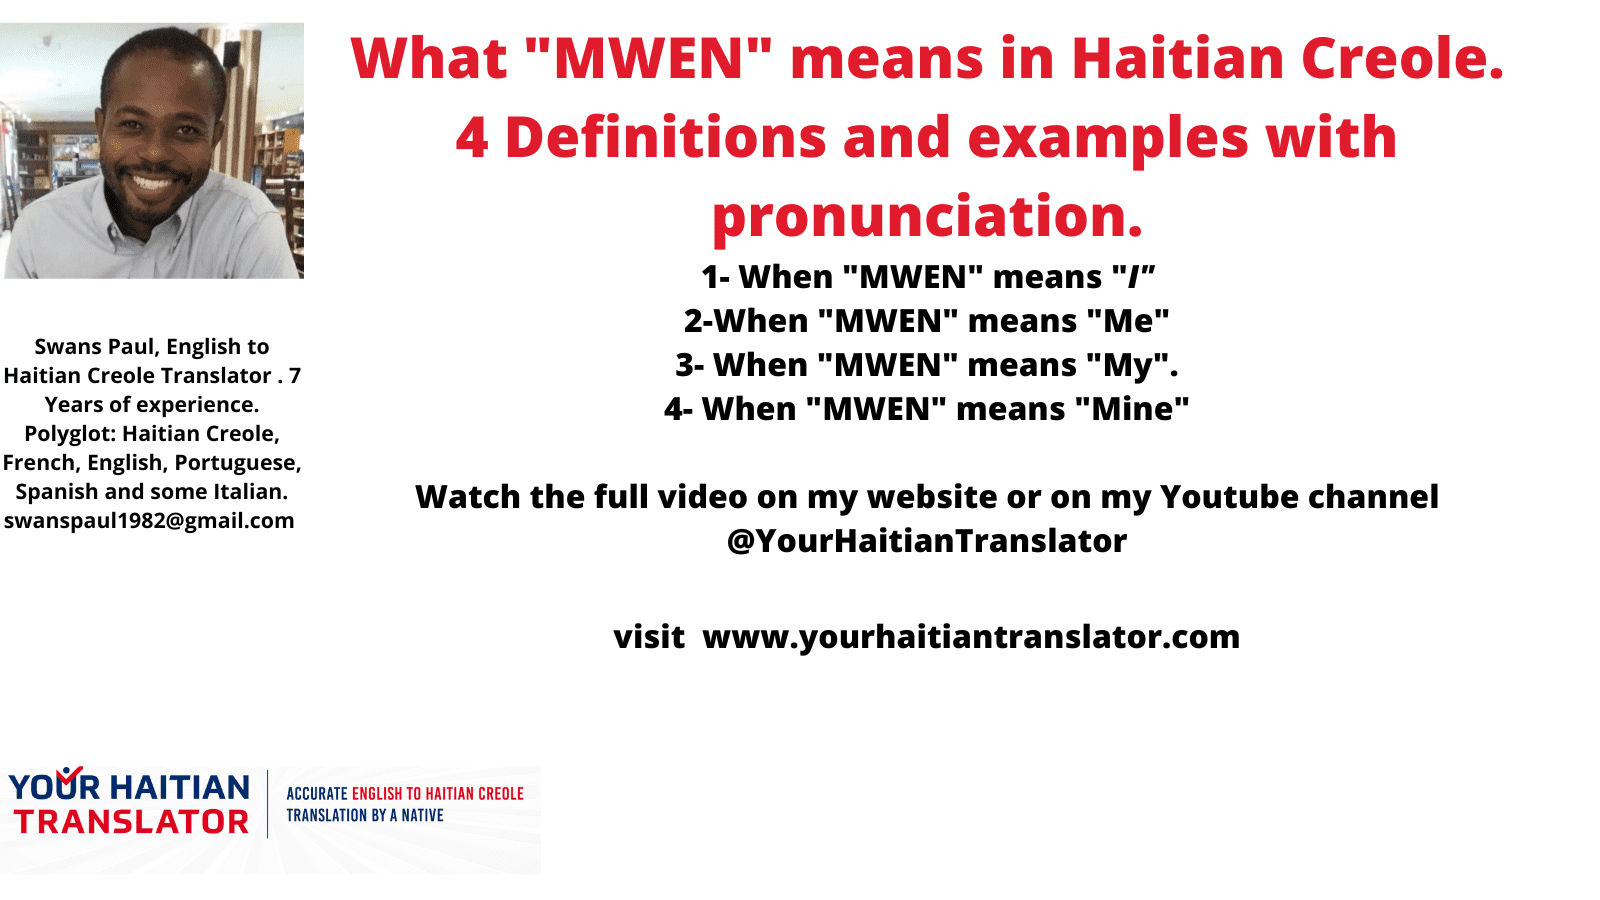 What MWEN means in Haitian Creole, 4 definitions with examples and pronunciation